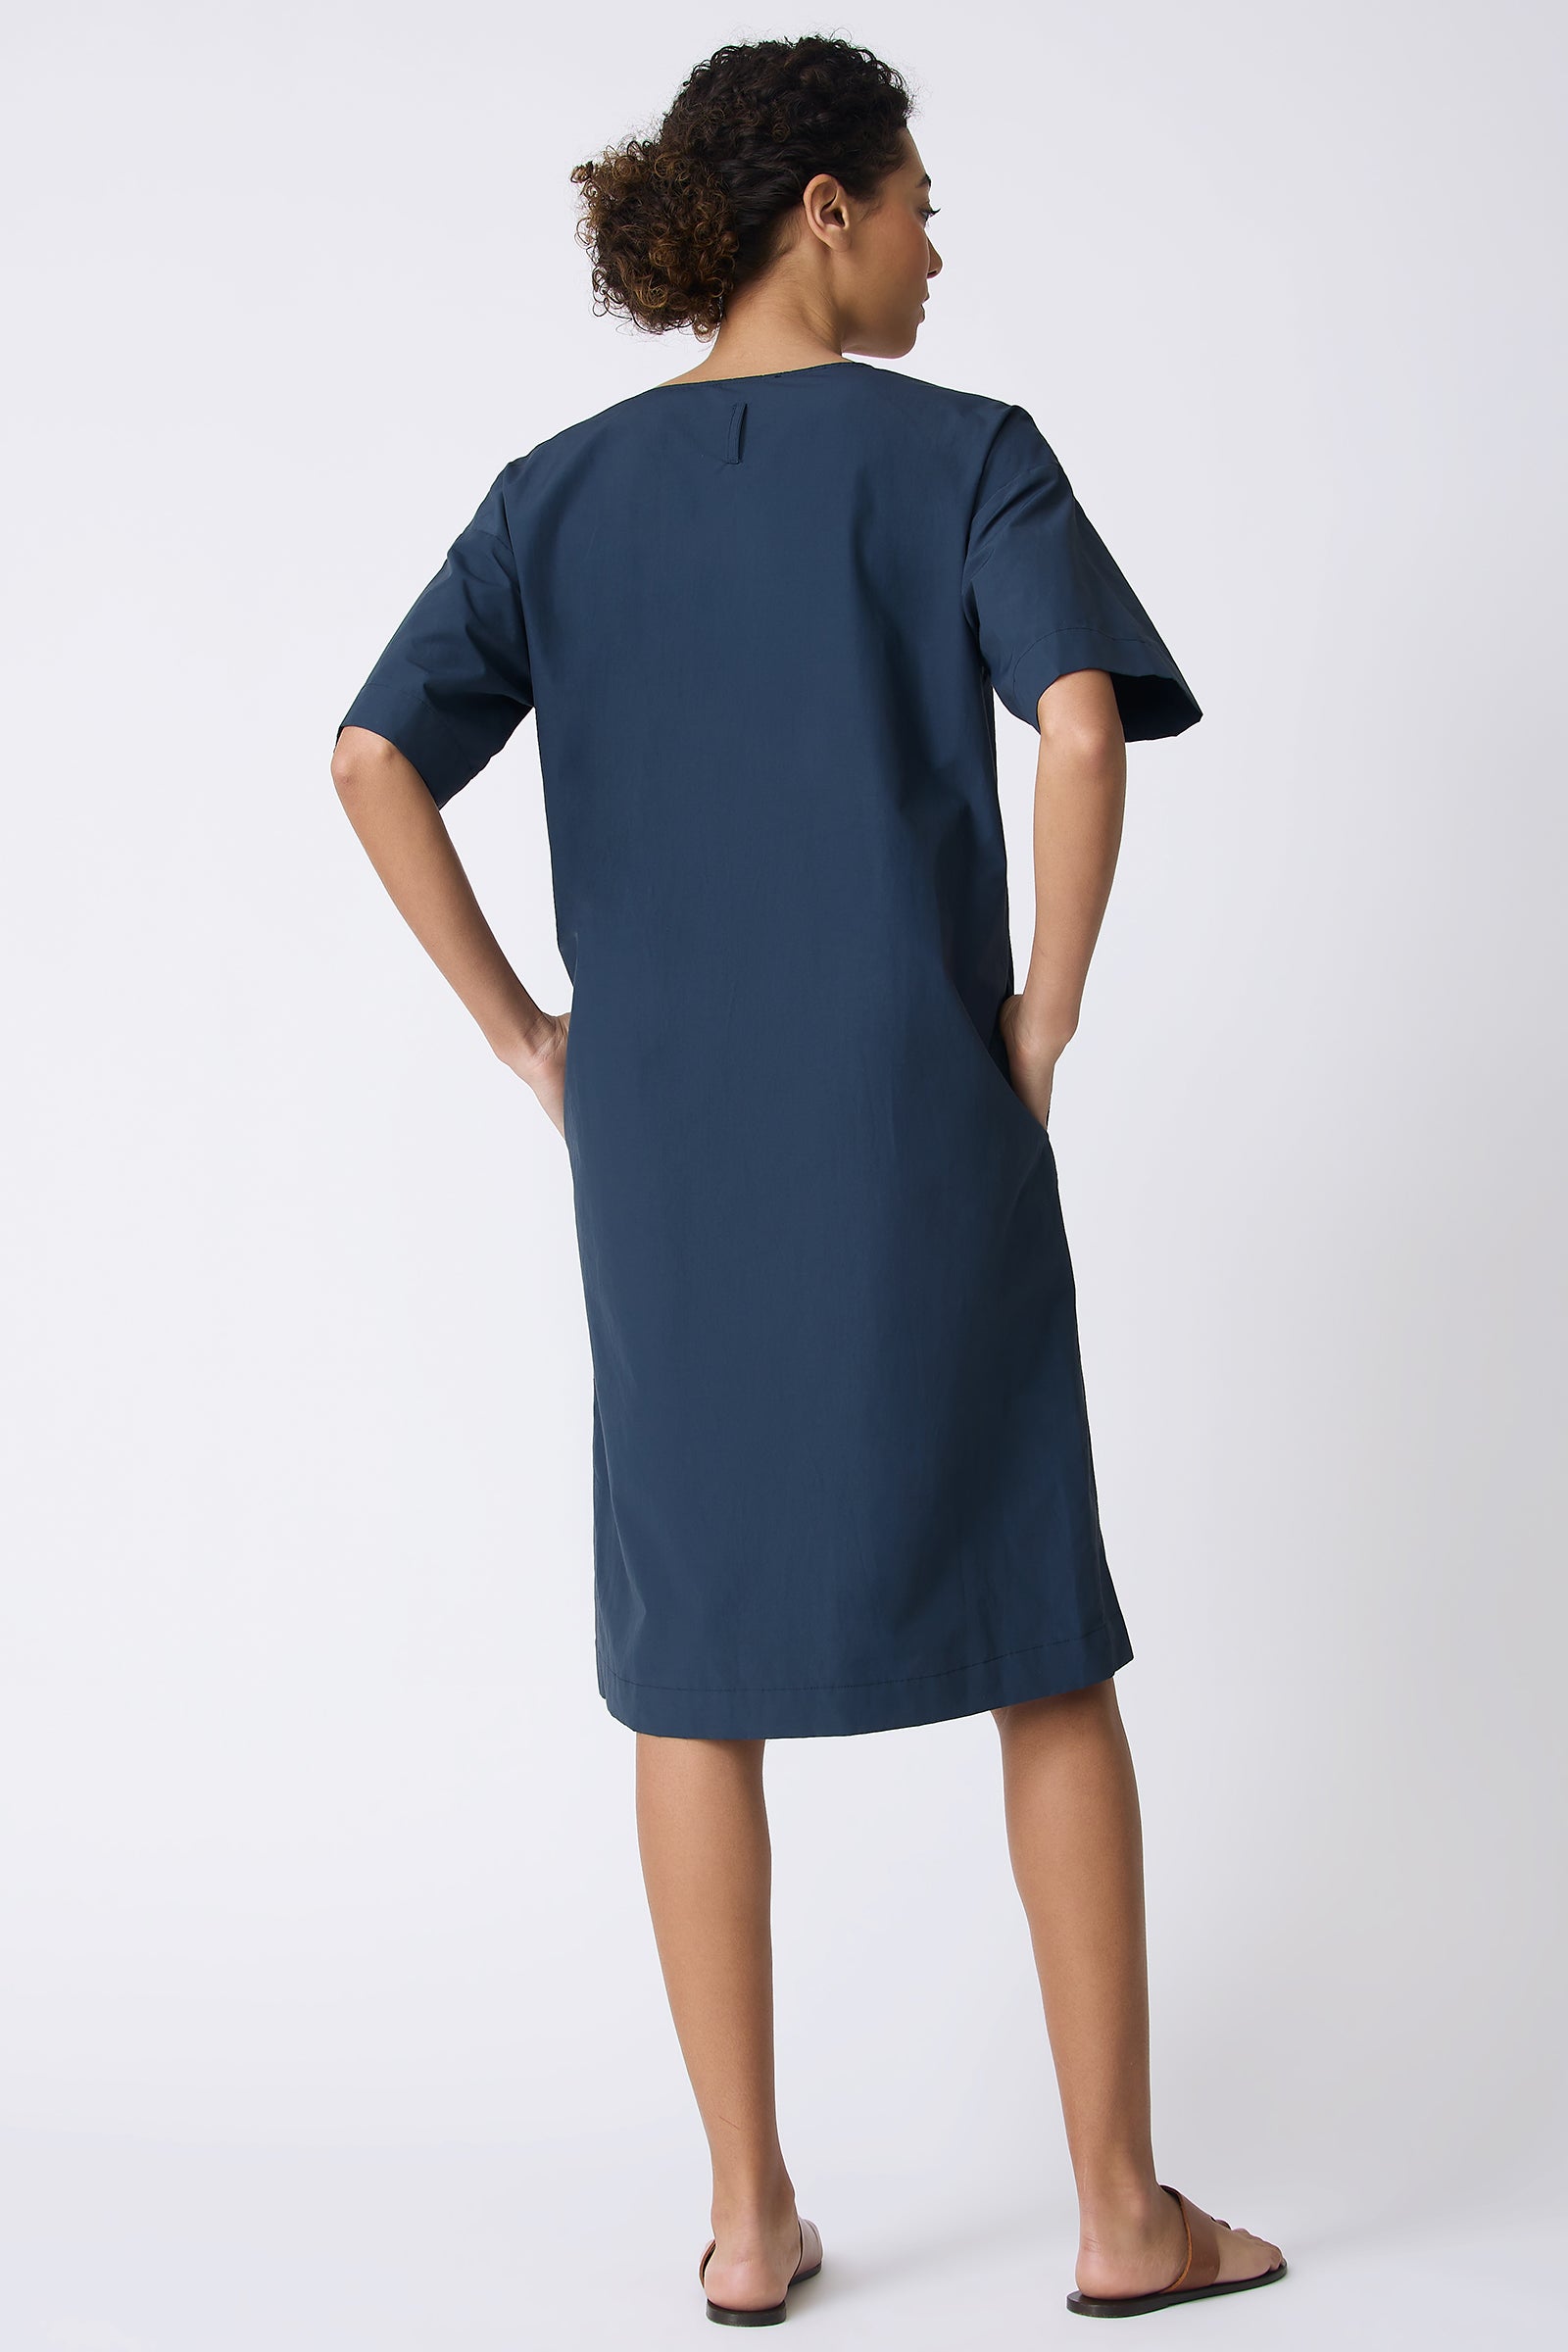 Kal Rieman Cara Fold Front Dress in Summer Navy on model looking right front view